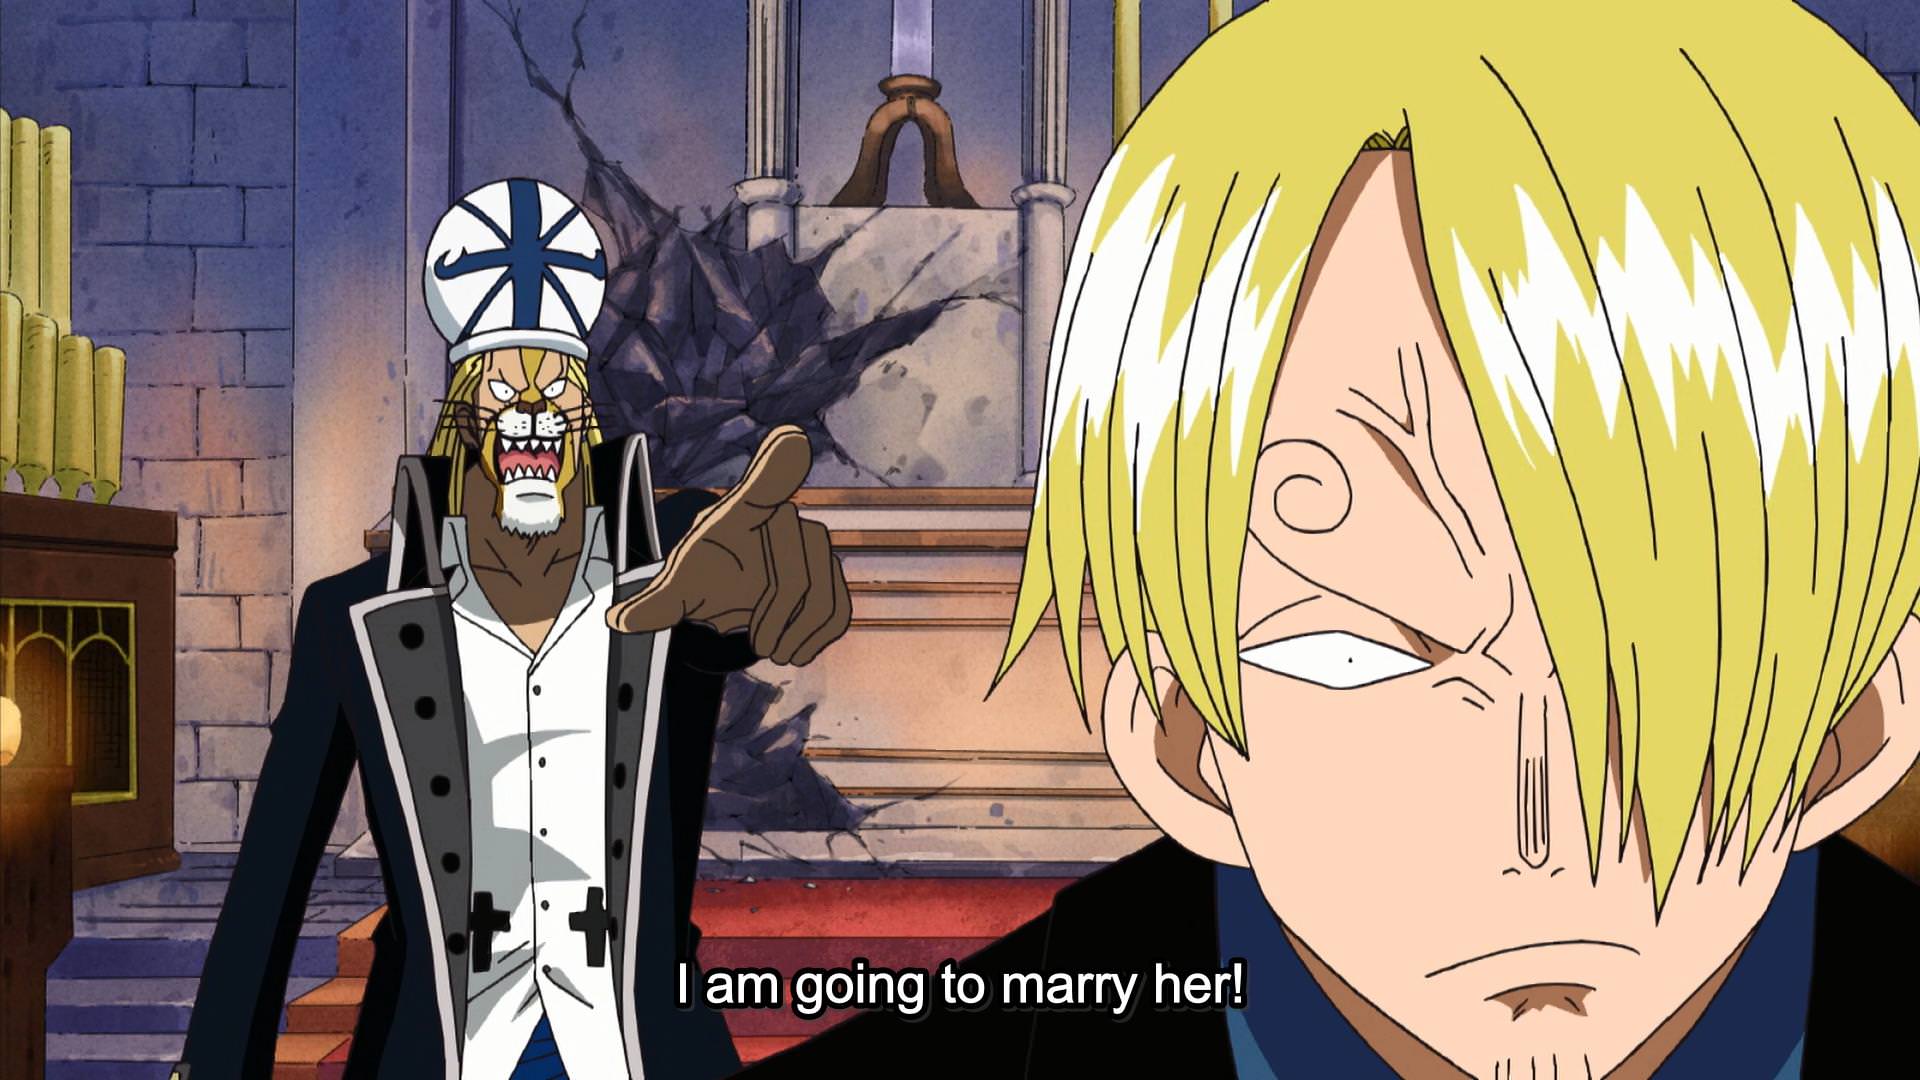 One Piece Episode 358 Discussion (30 - ) - Forums 